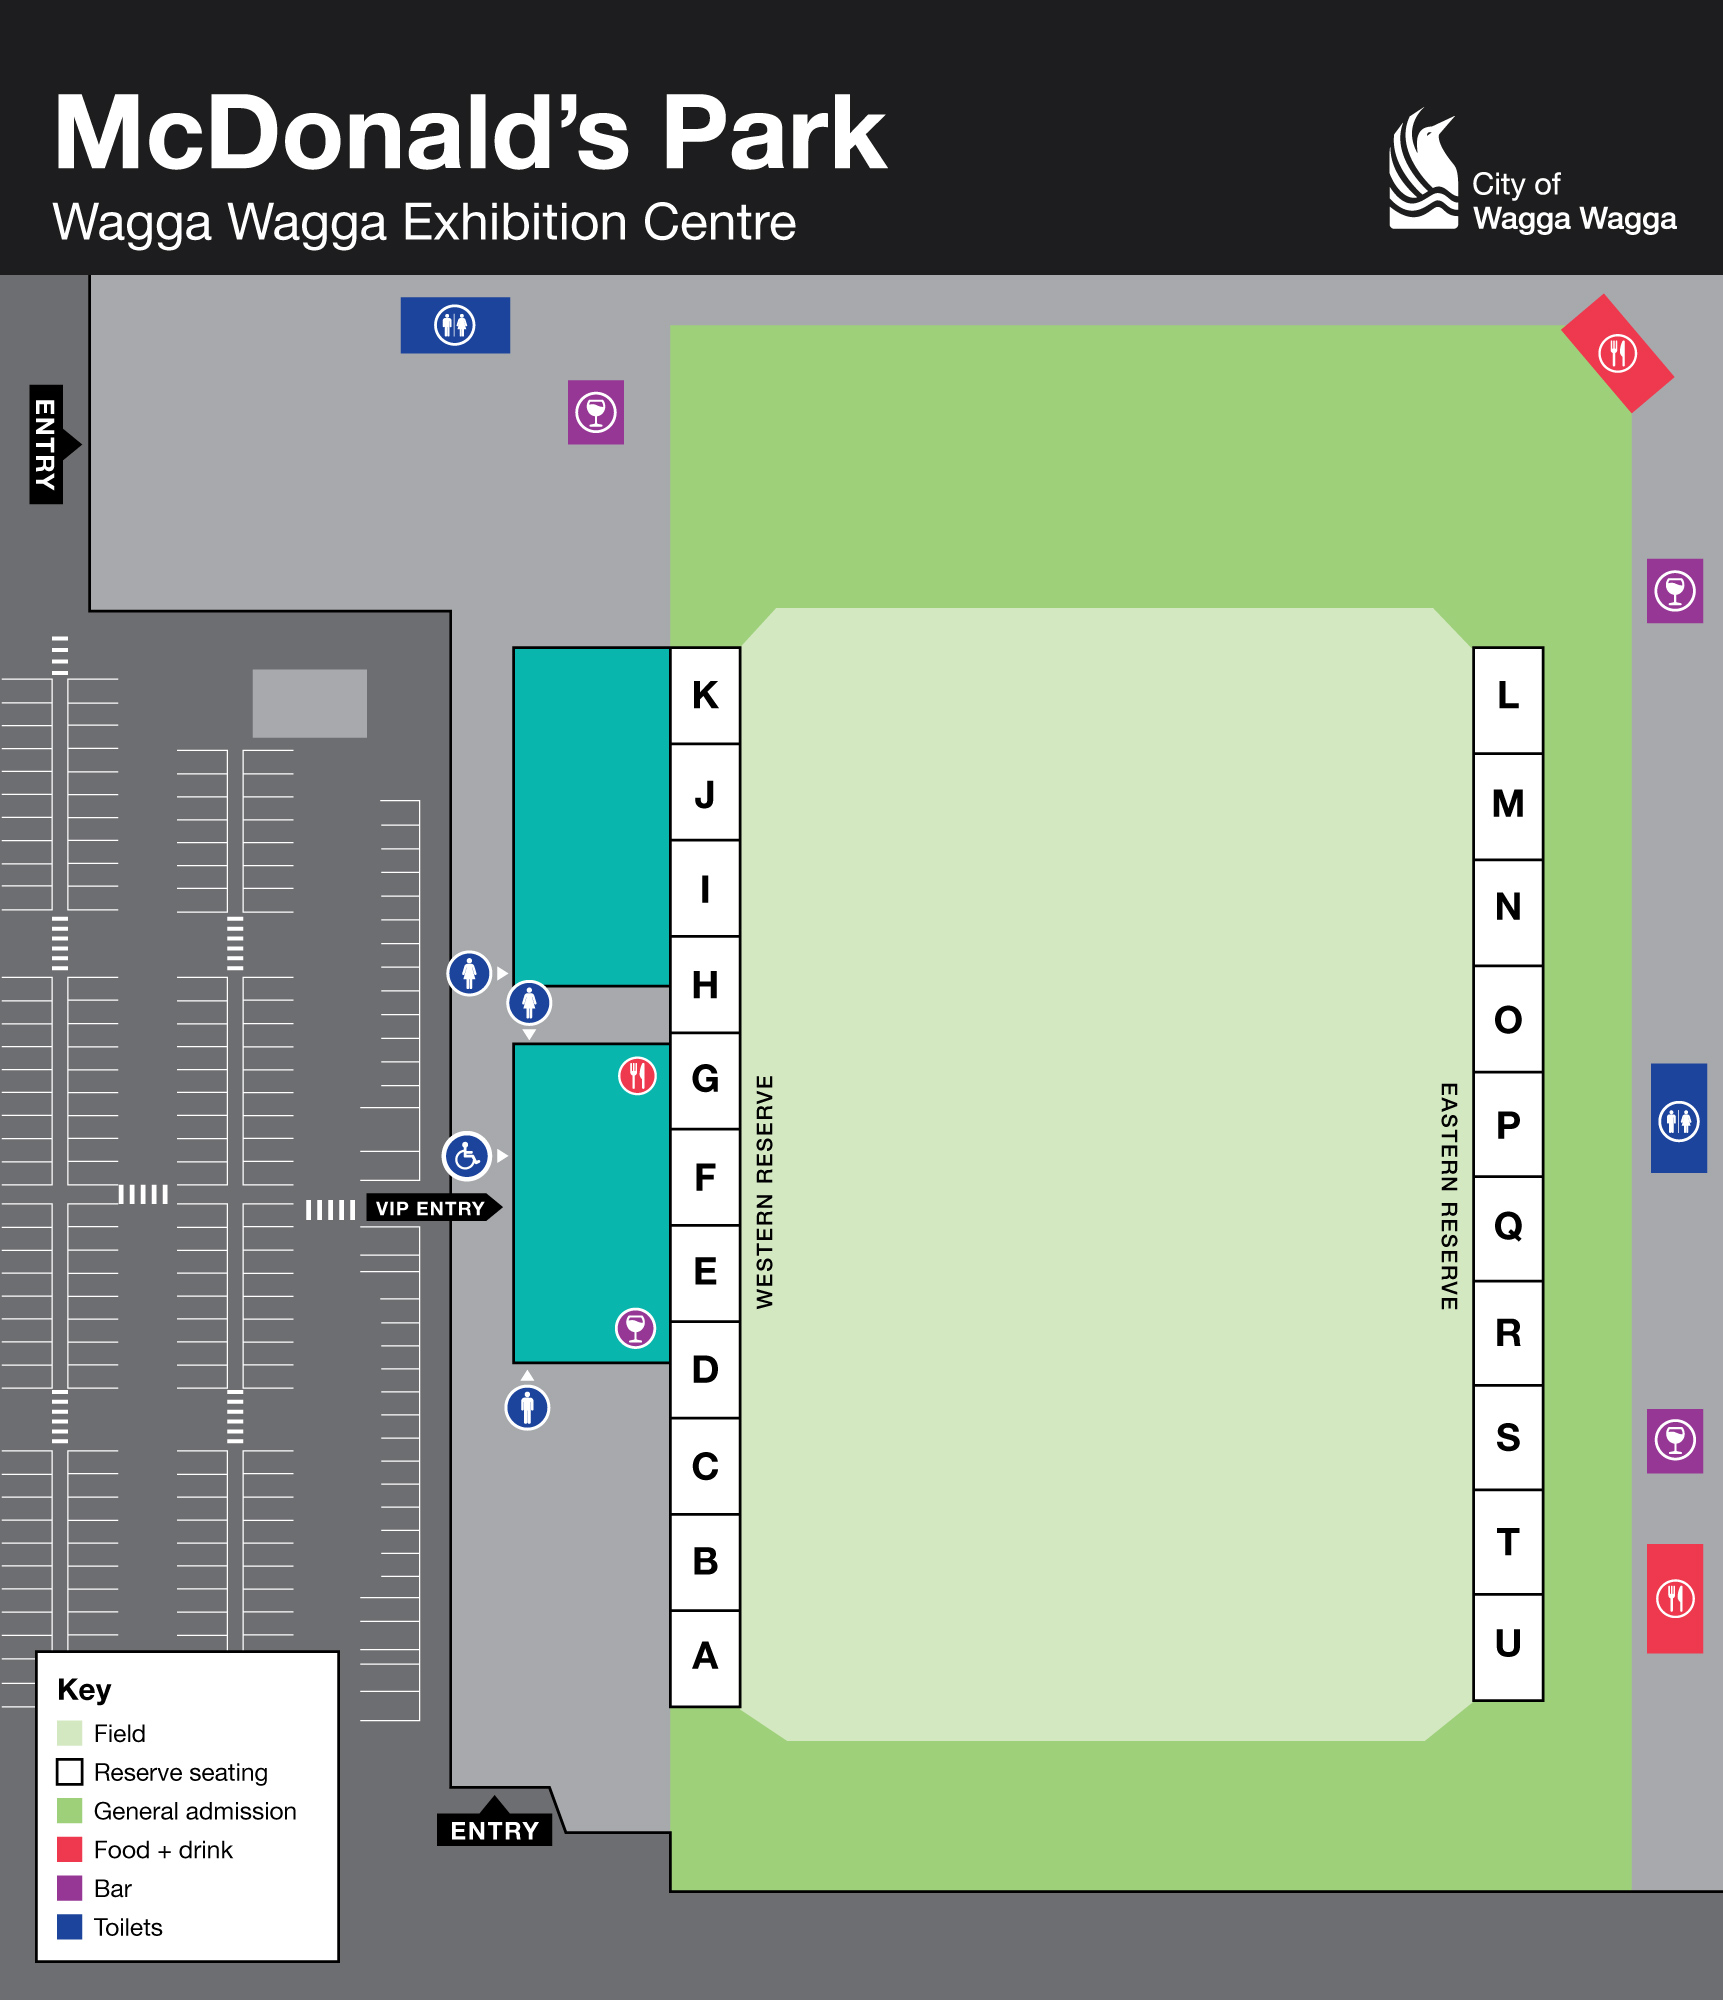 Seating allocations at McDonald's Park.